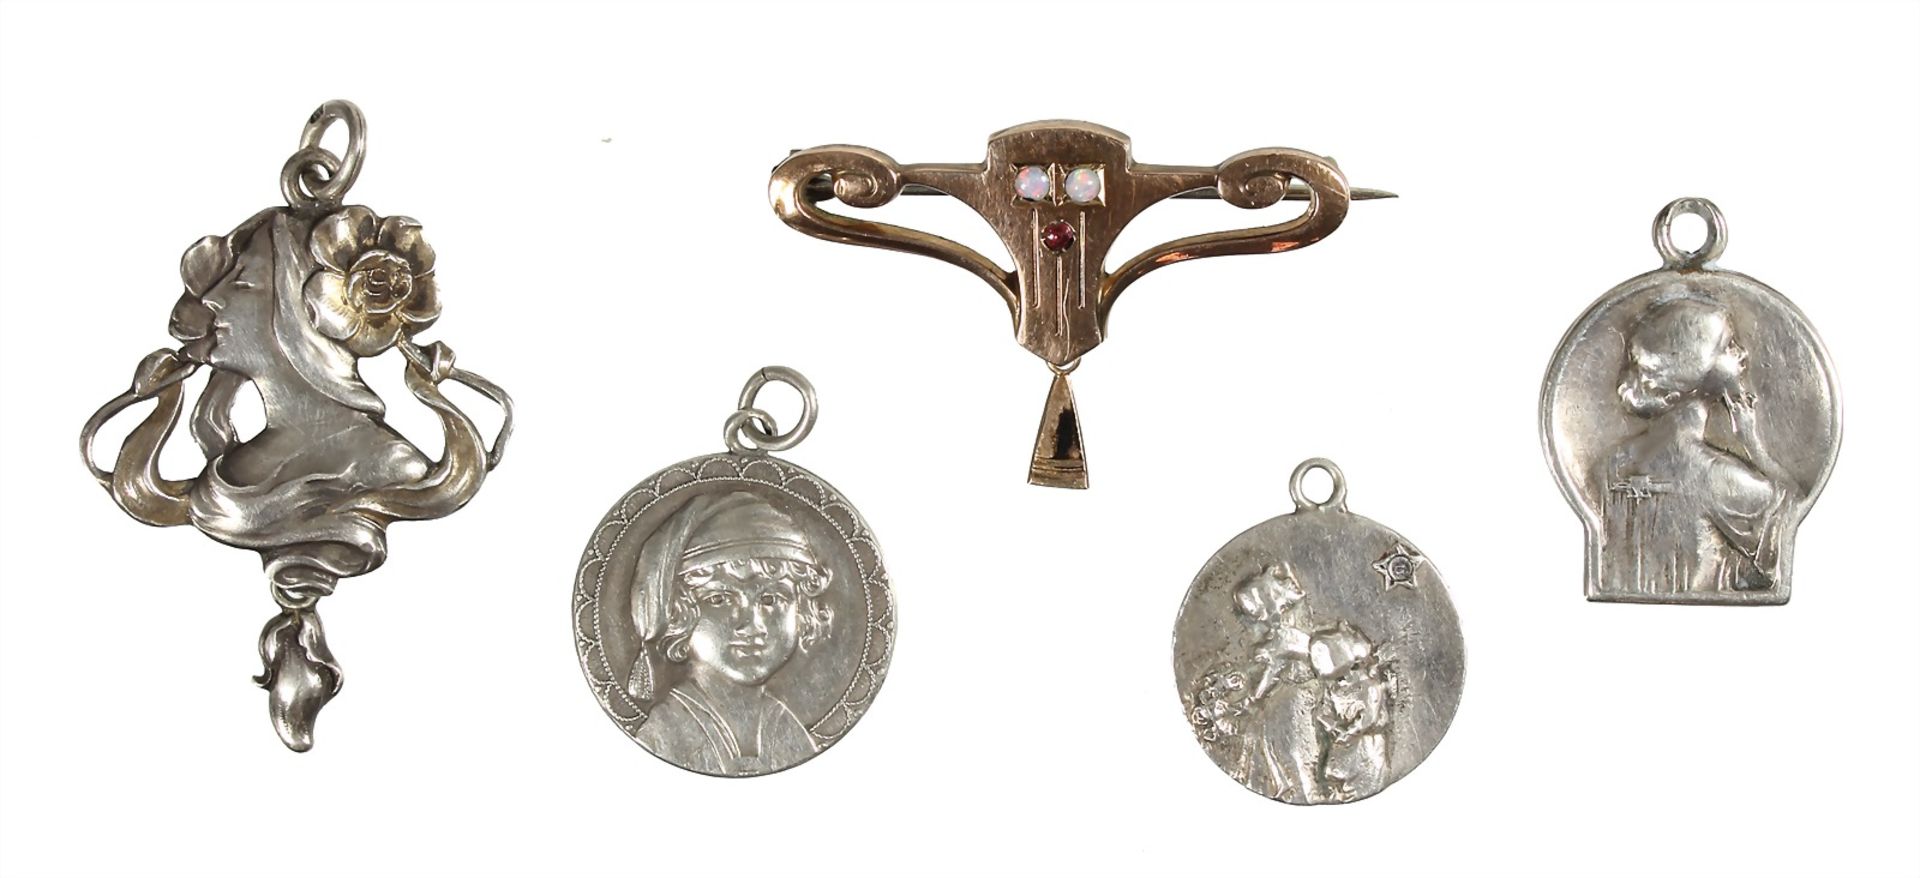 lot: art nouveau - jewelry around 1900, 4 pendant silver 800/000 and 900/000, 1 brooch, gold